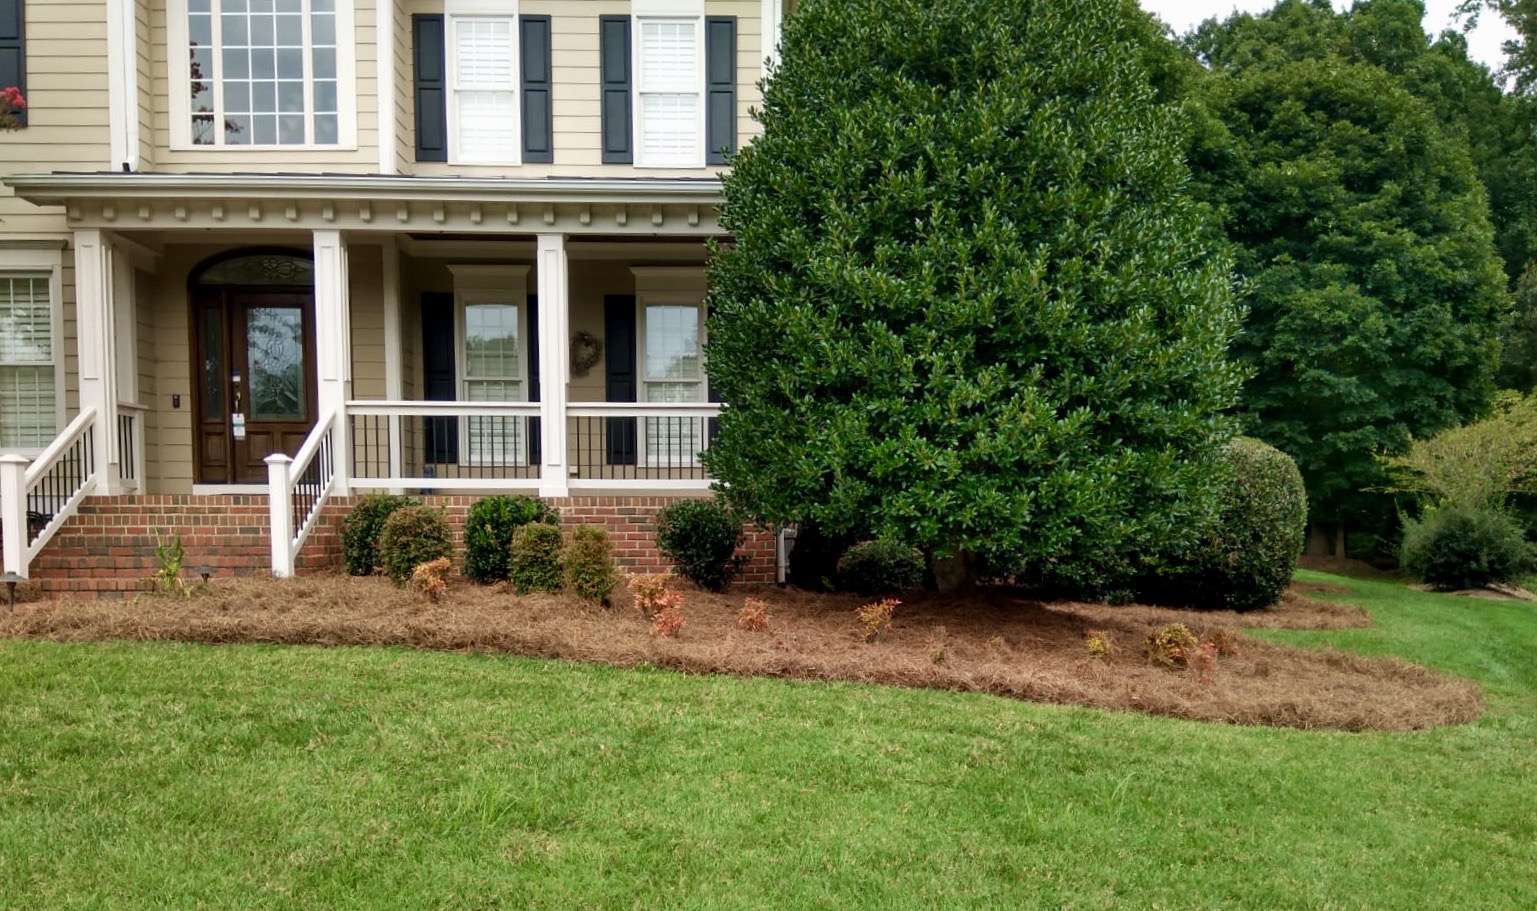 Agape Lawn Company Chapel Hill-Lawn Improvement-Landscaping Services Near Me